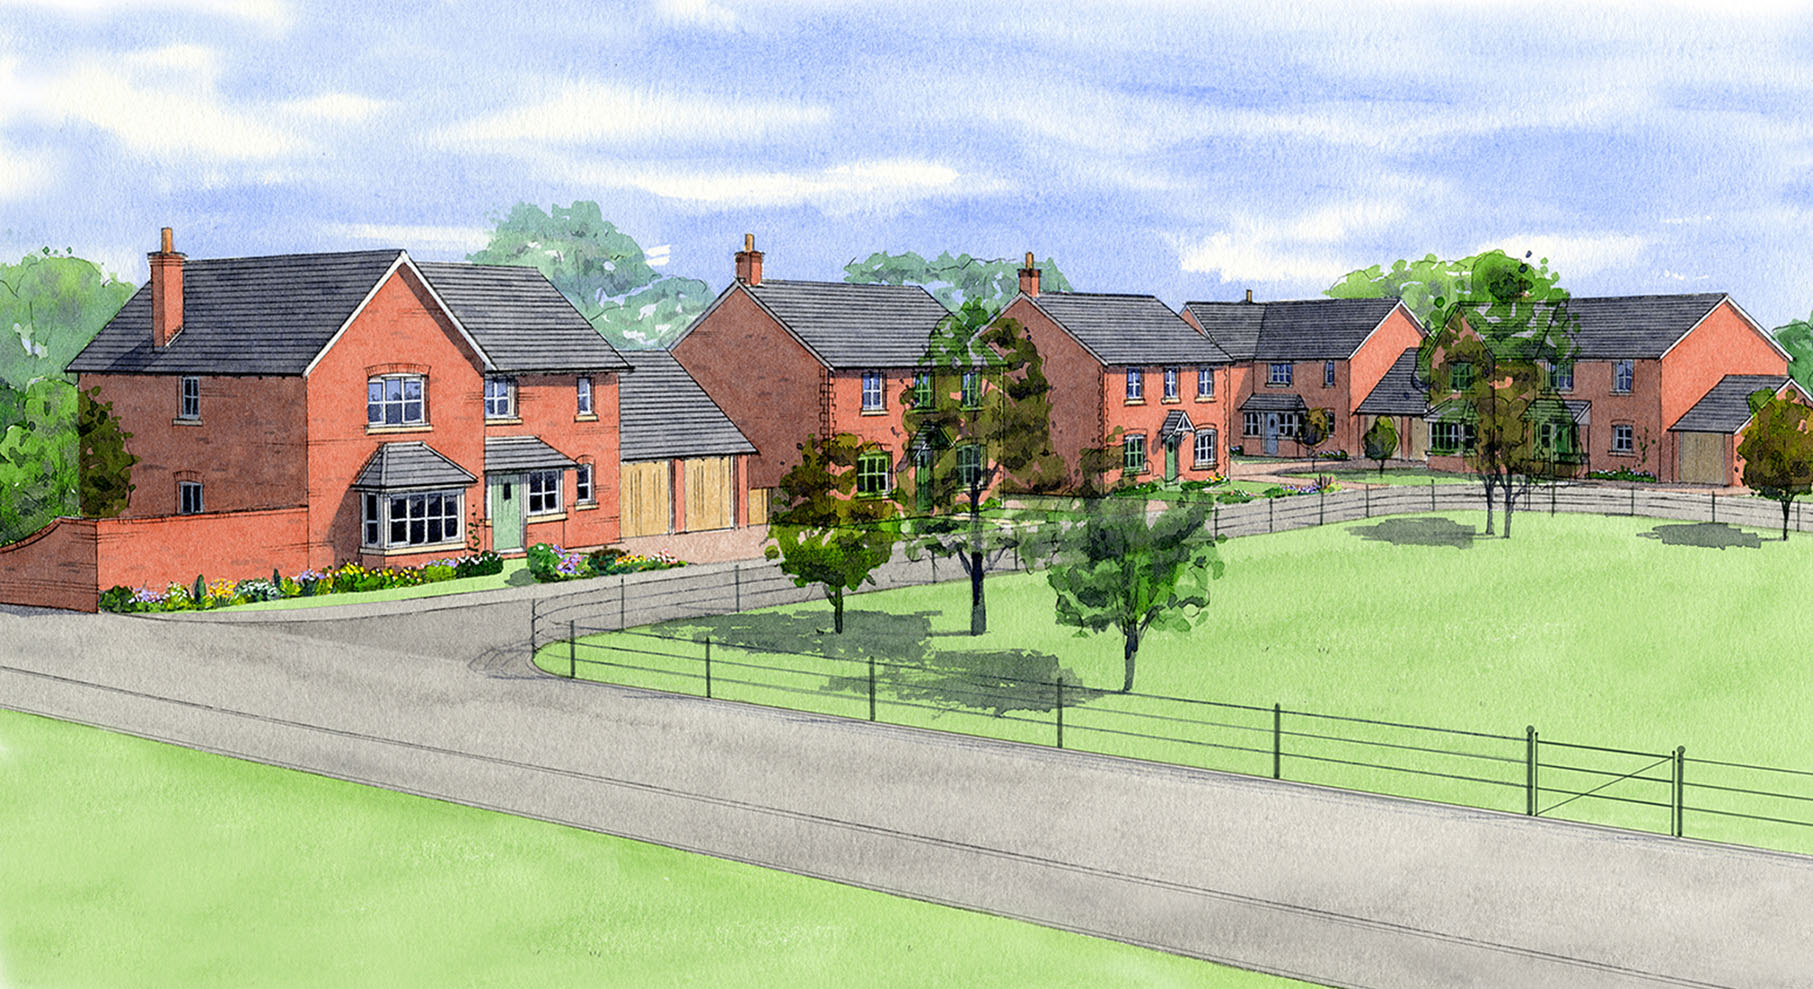 Exclusive new development comes to Baschurch